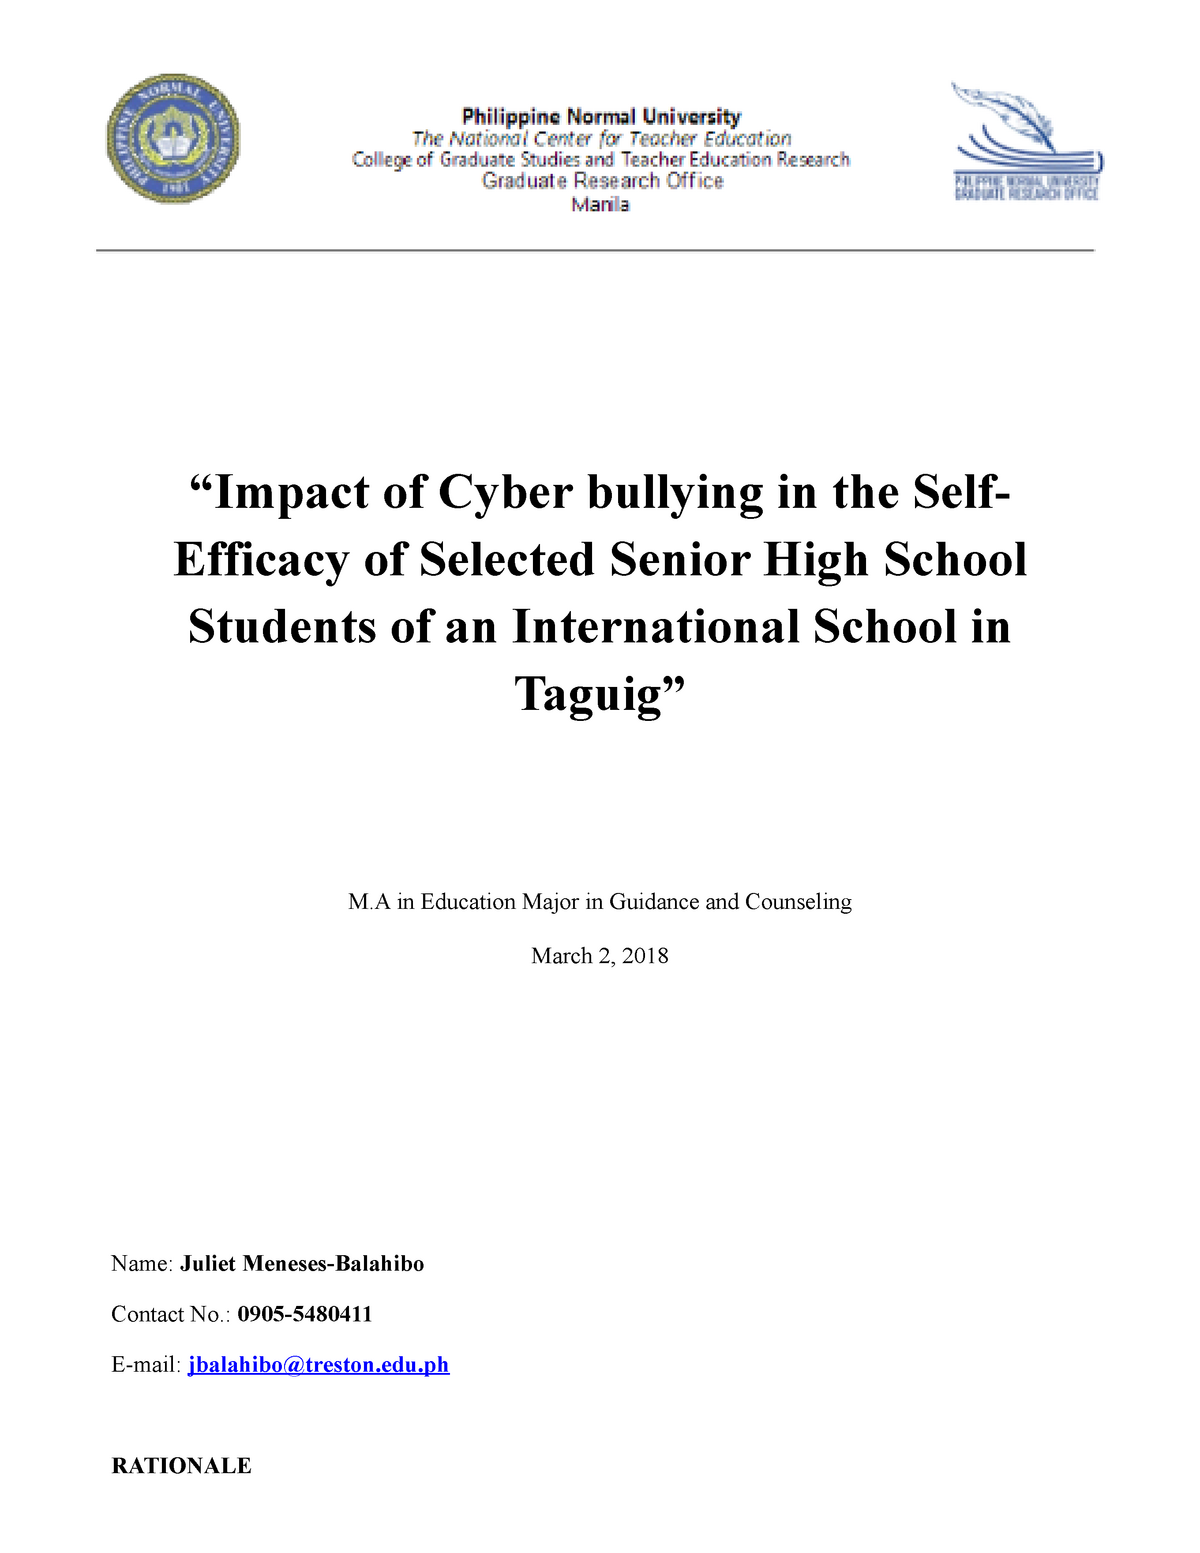 concept paper about cyberbullying